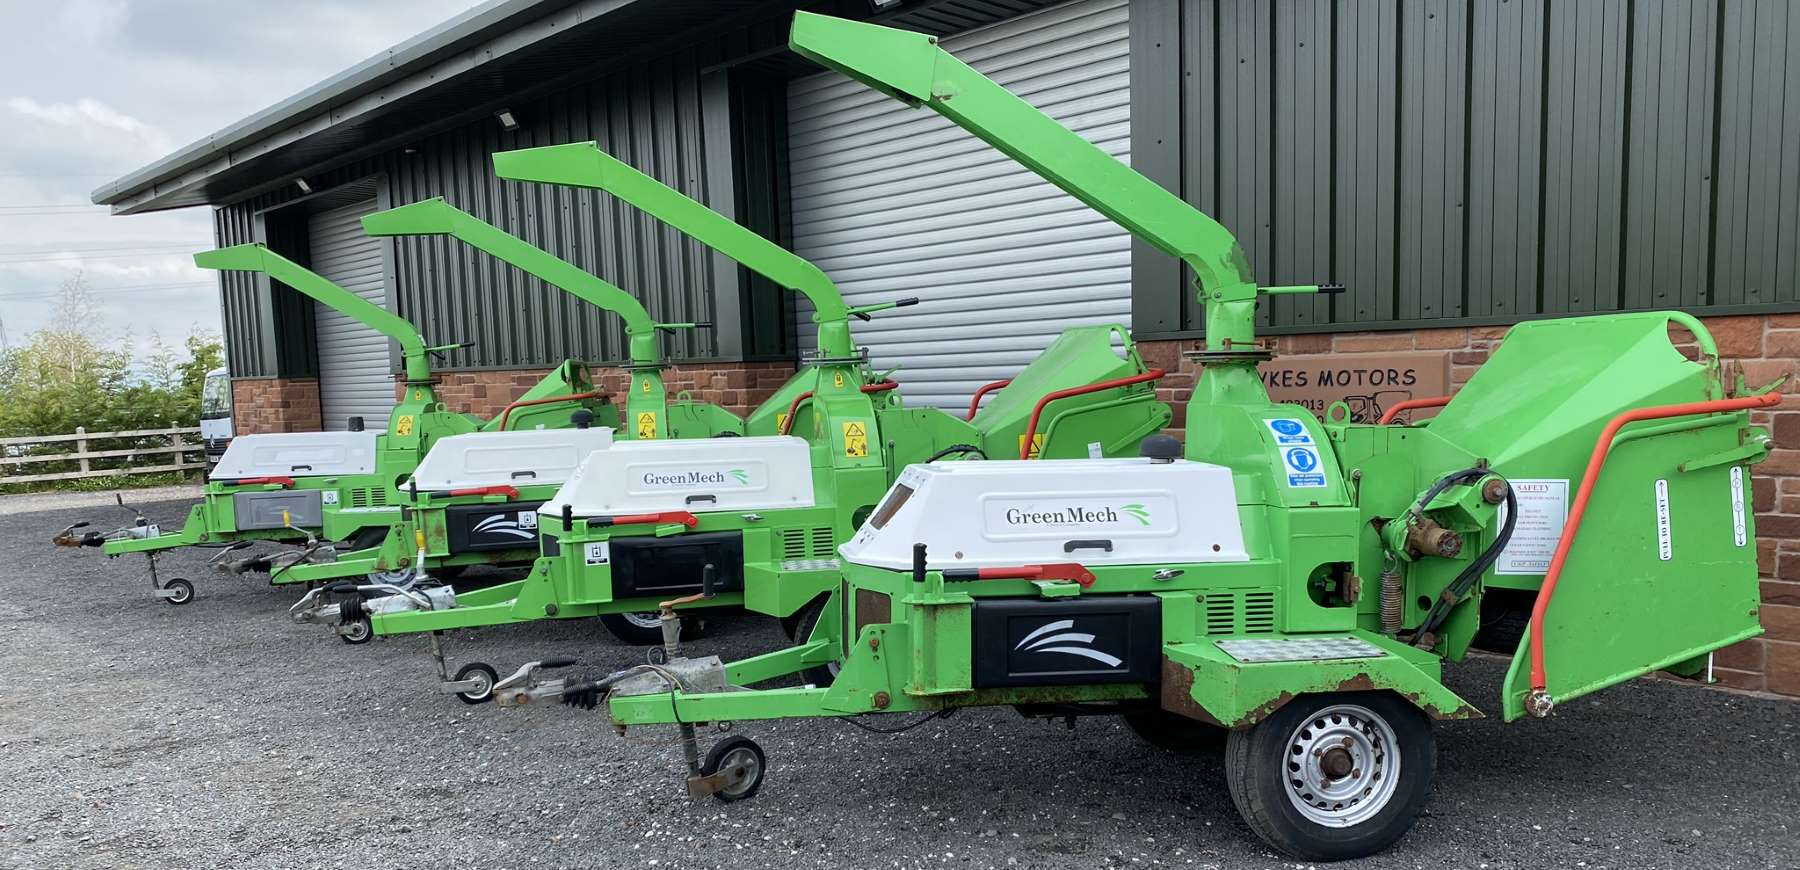 D Wykes Motors - Ground Care Machinery Sales in Cumbria and the UK